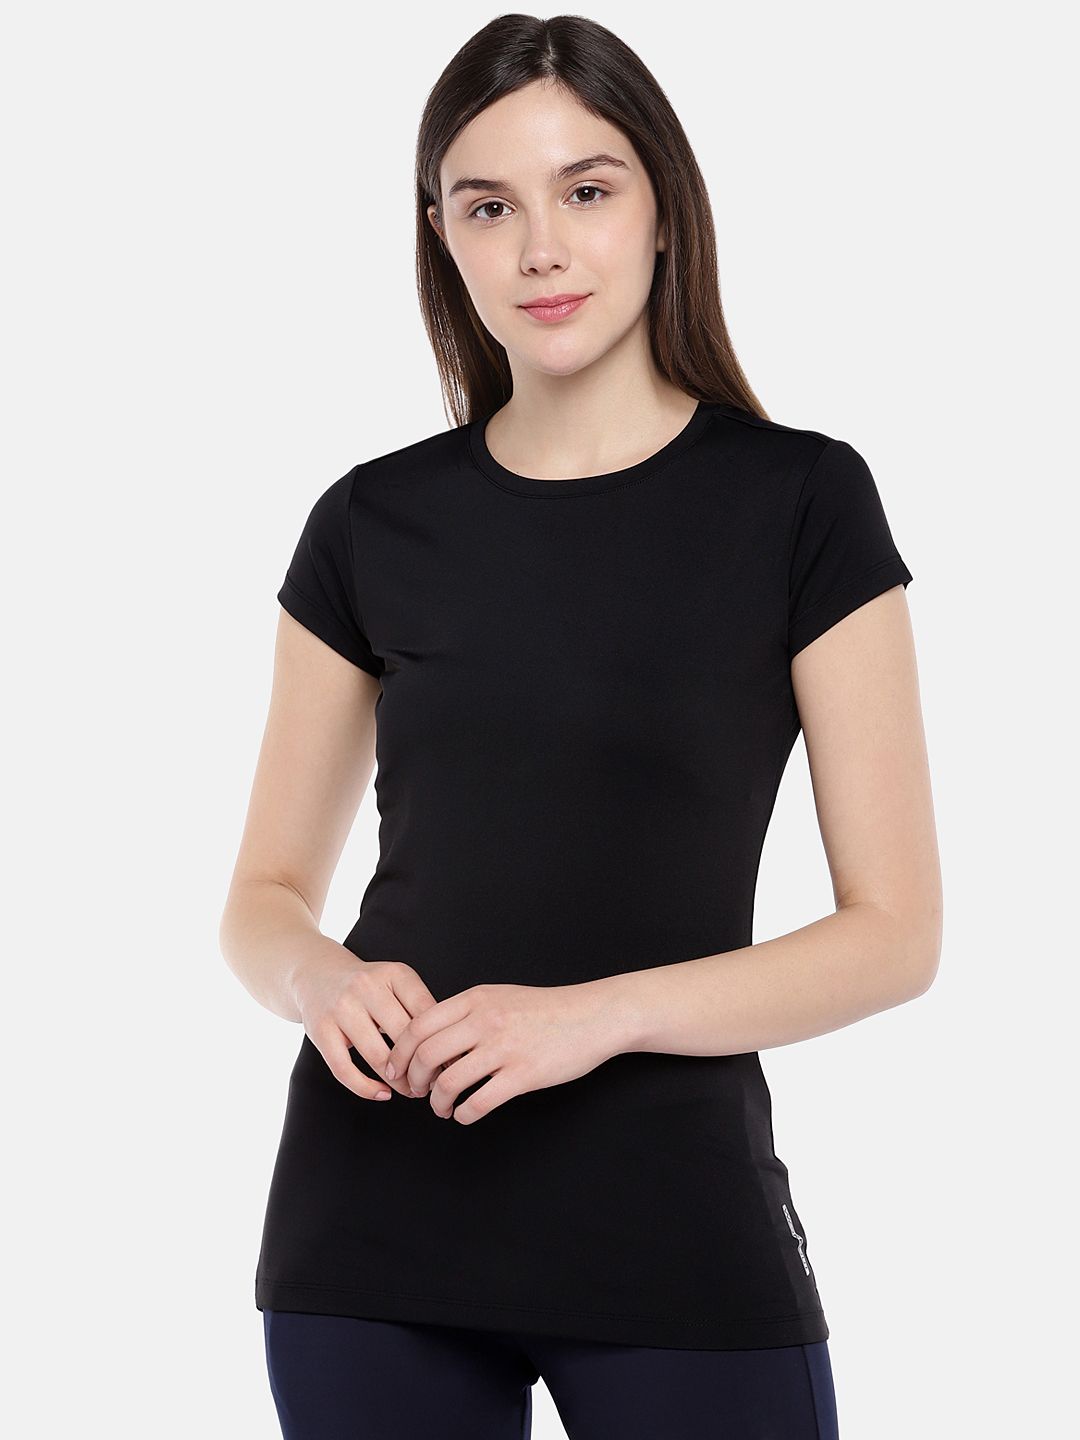 Sweet Dreams Women Black Solid Lounge T-Shirt F-LAT-401 Price in India